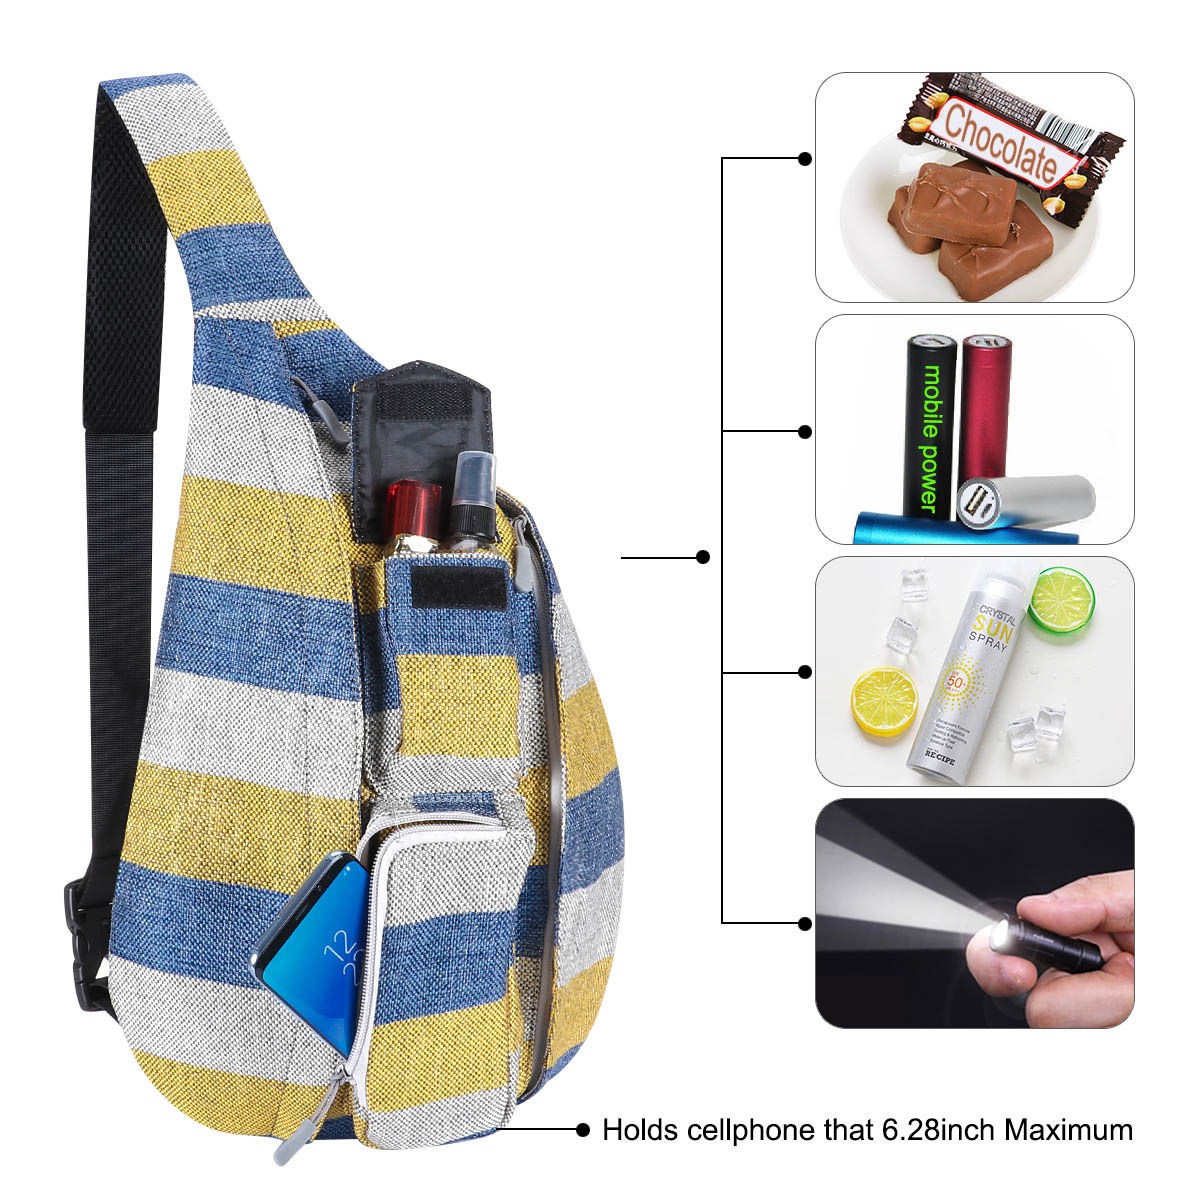 HAWEE Chest Daypack Hiking Backpack Sling Bag Sports Shoulder Travel Crossbody Daypack for Women, Wide Stripes of Yellow/ Blue/Gray - image 3 of 7